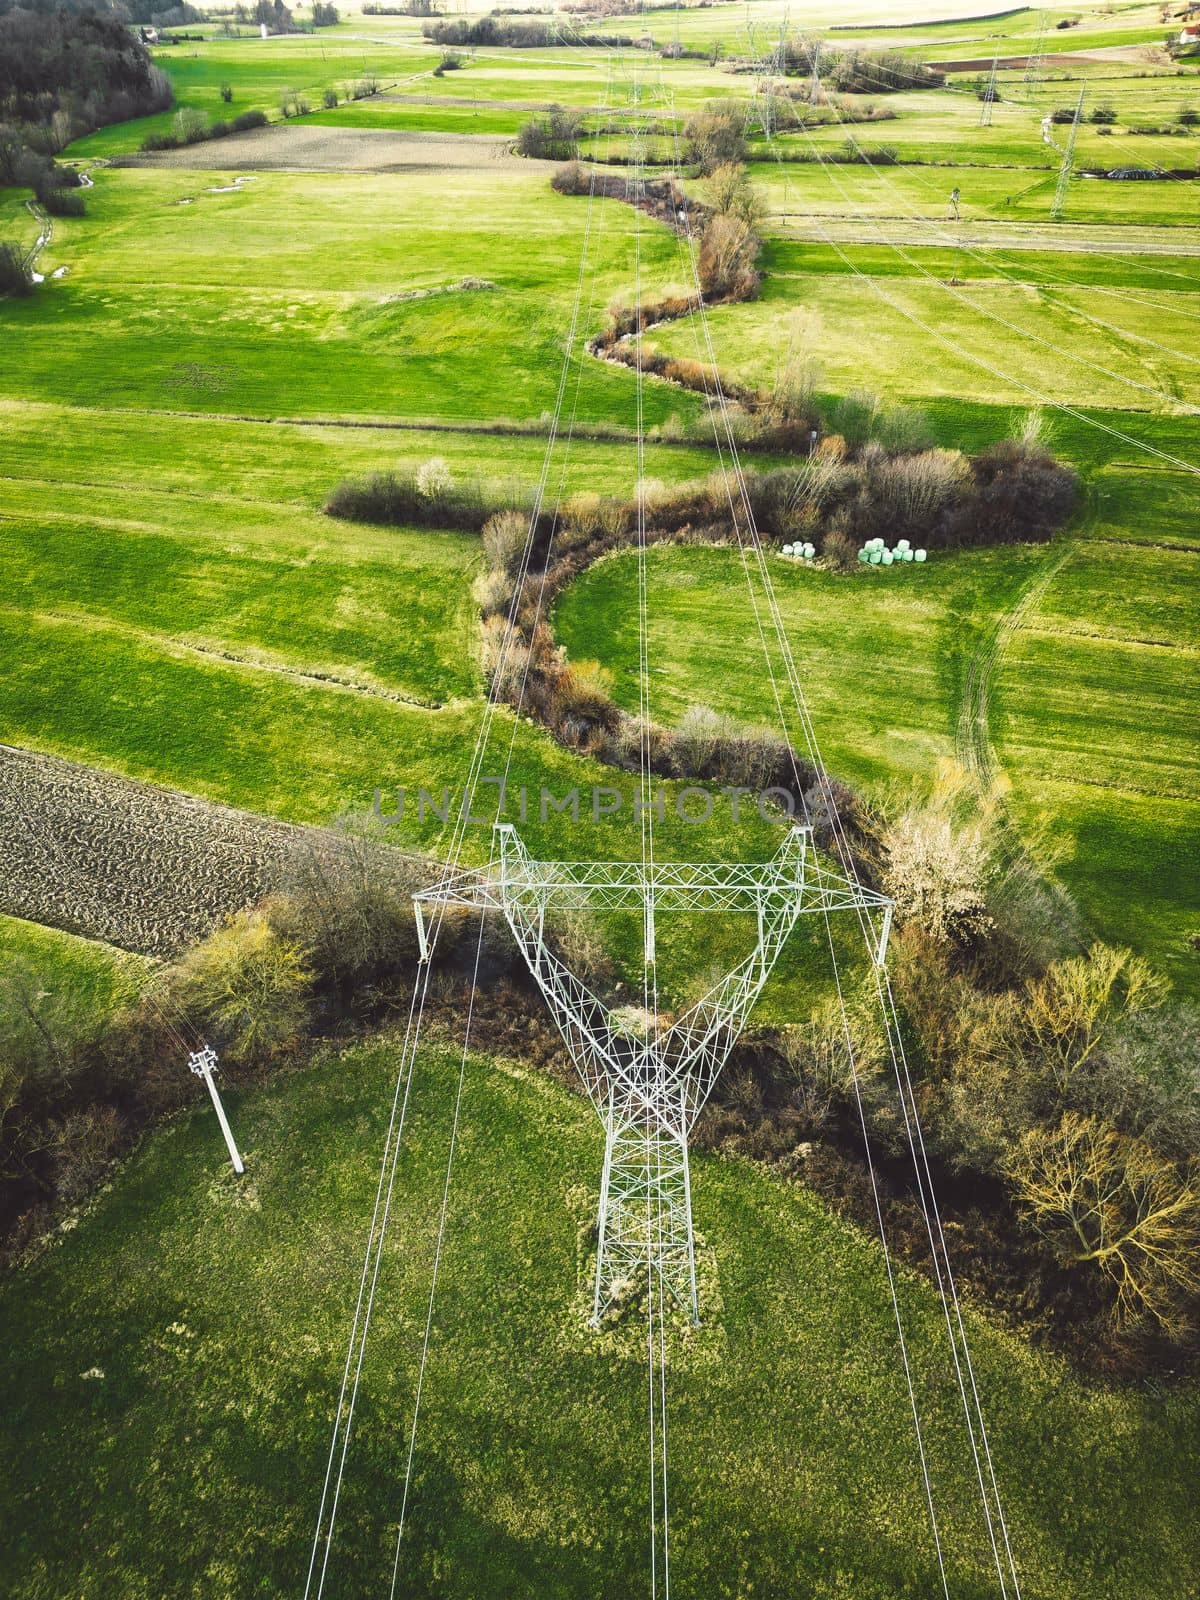 Vertical photo directly above centered on the electrical tower an electrical wires running from it across the green country side of Slovenia by VisualProductions